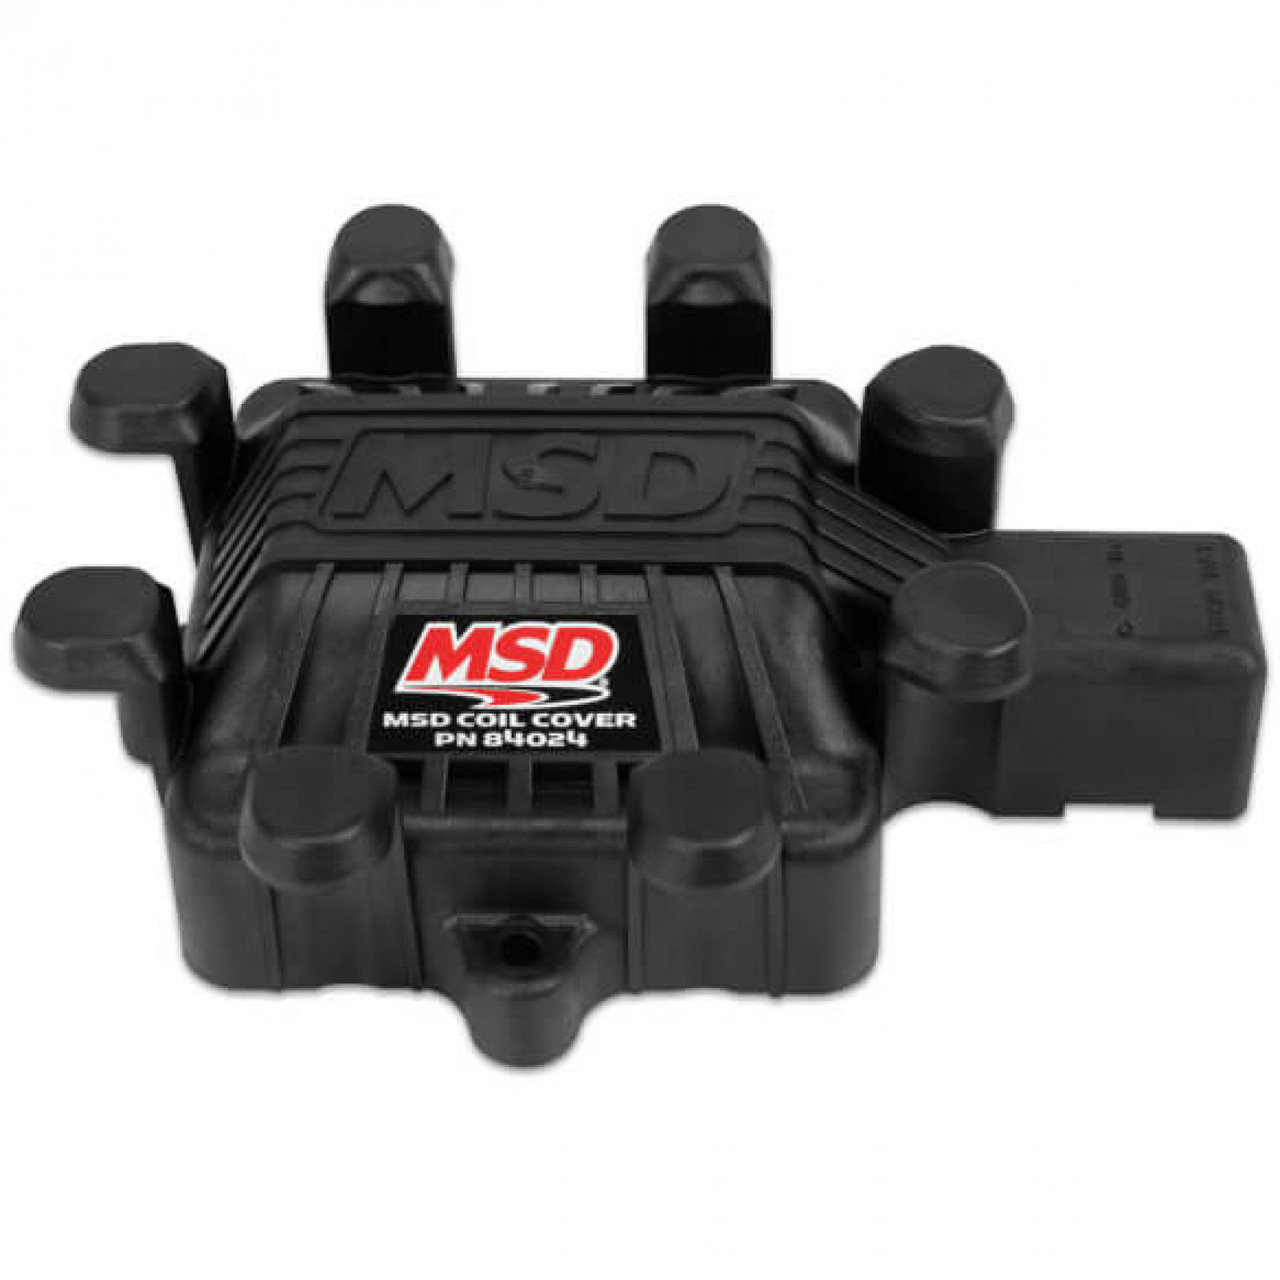 Black Extreme Output Dust Cover, Internal Coil (MSD-284024)